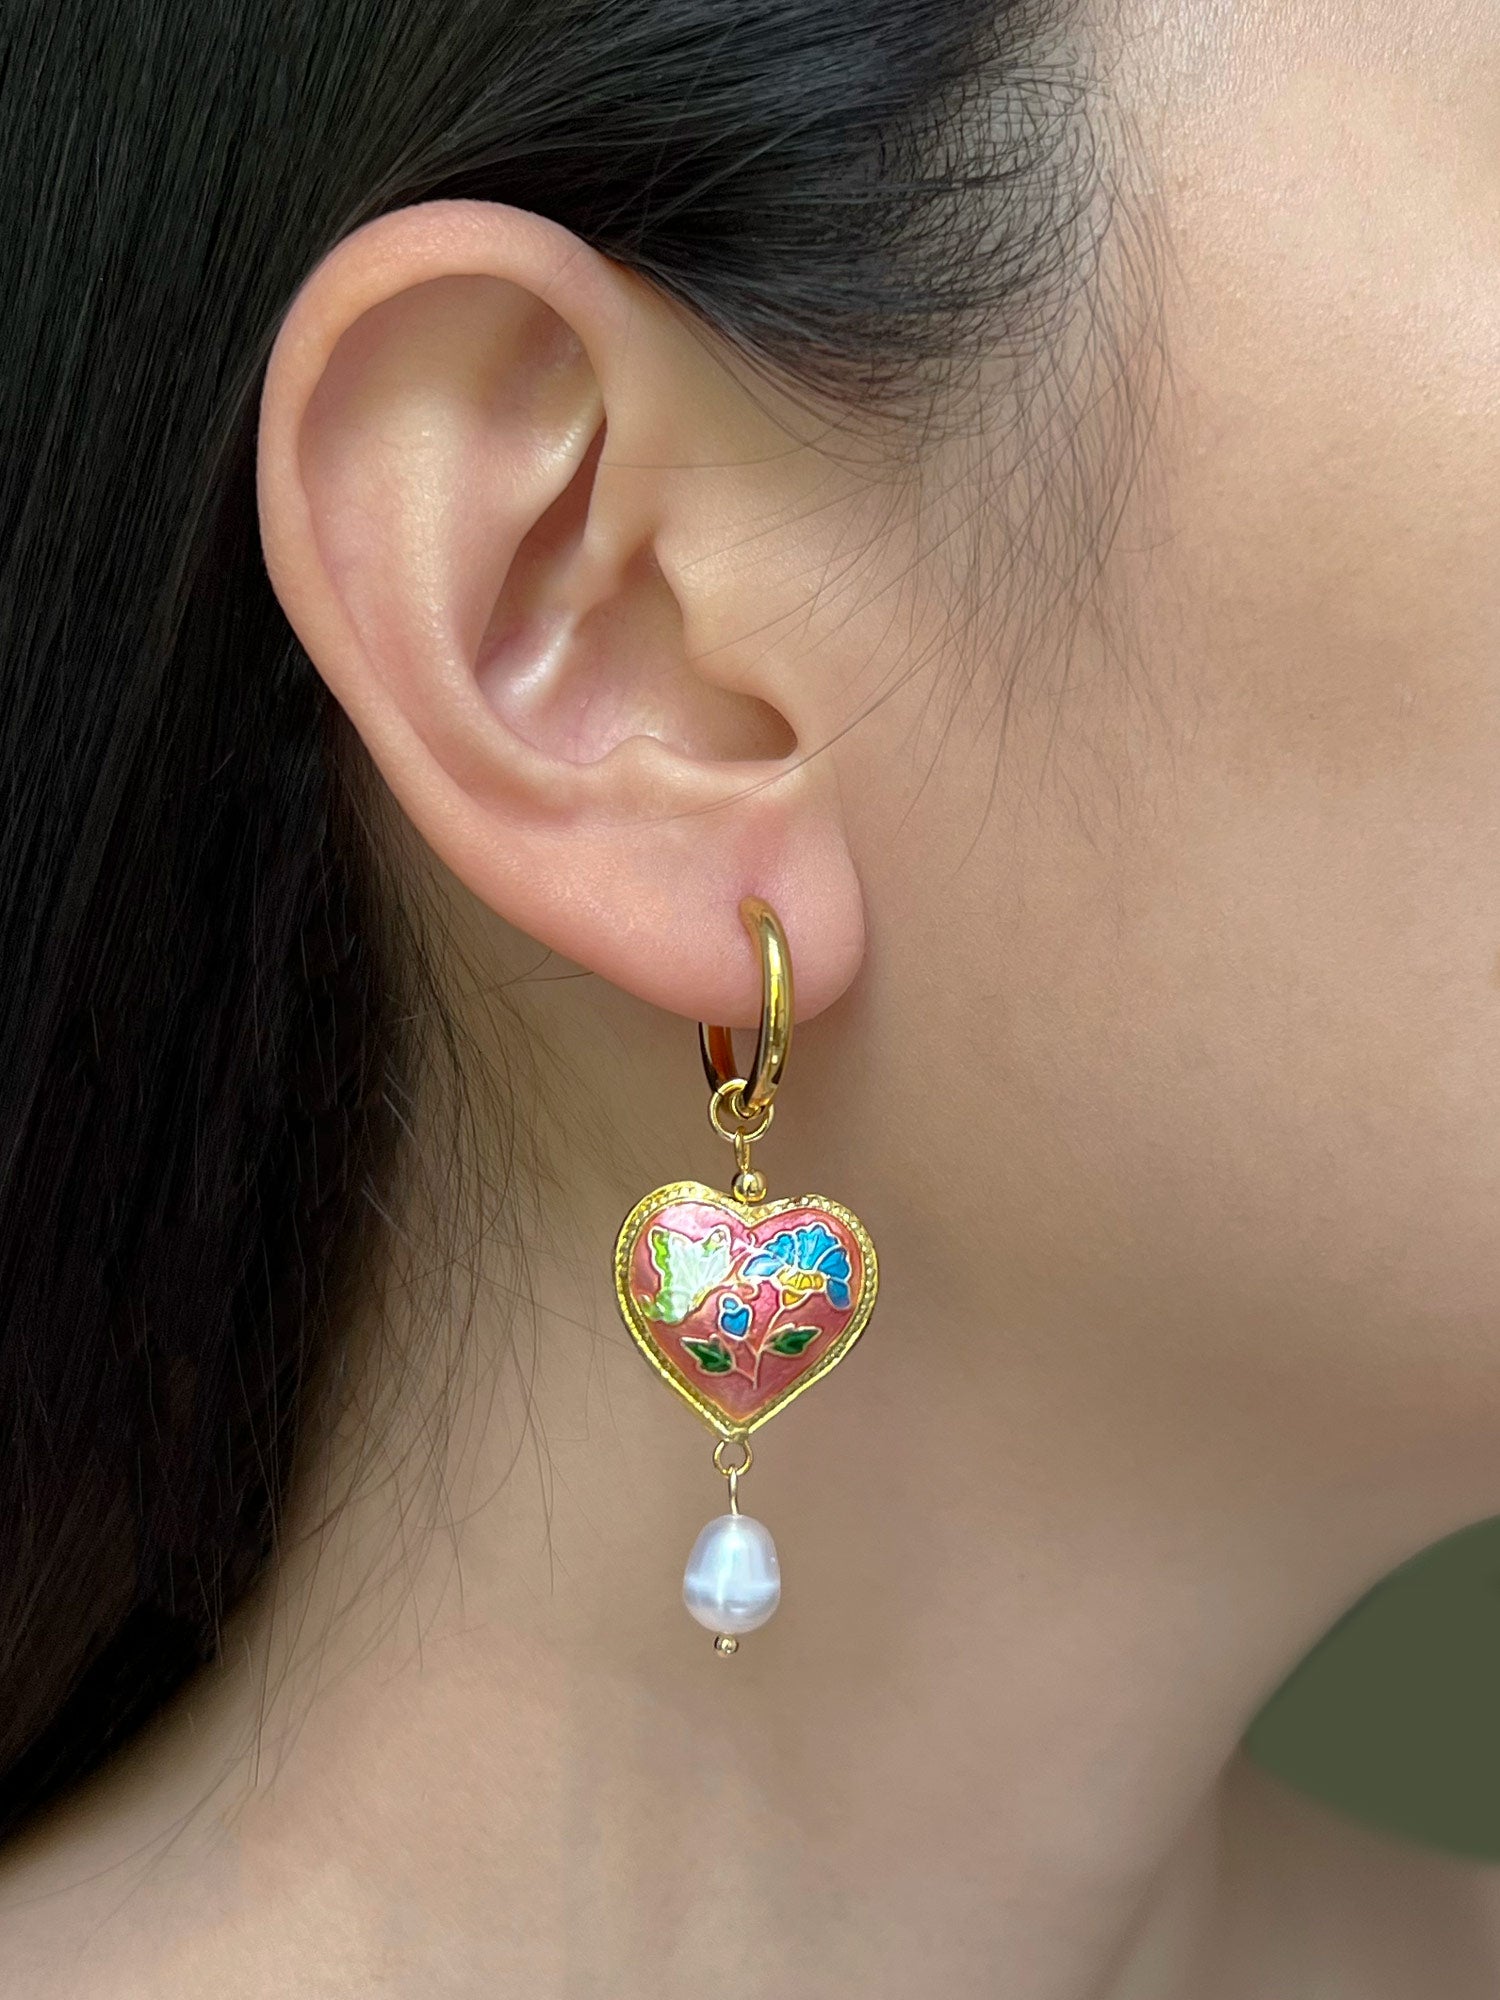 Pink Cloisonne Heart Dangling Earrings with Pearl